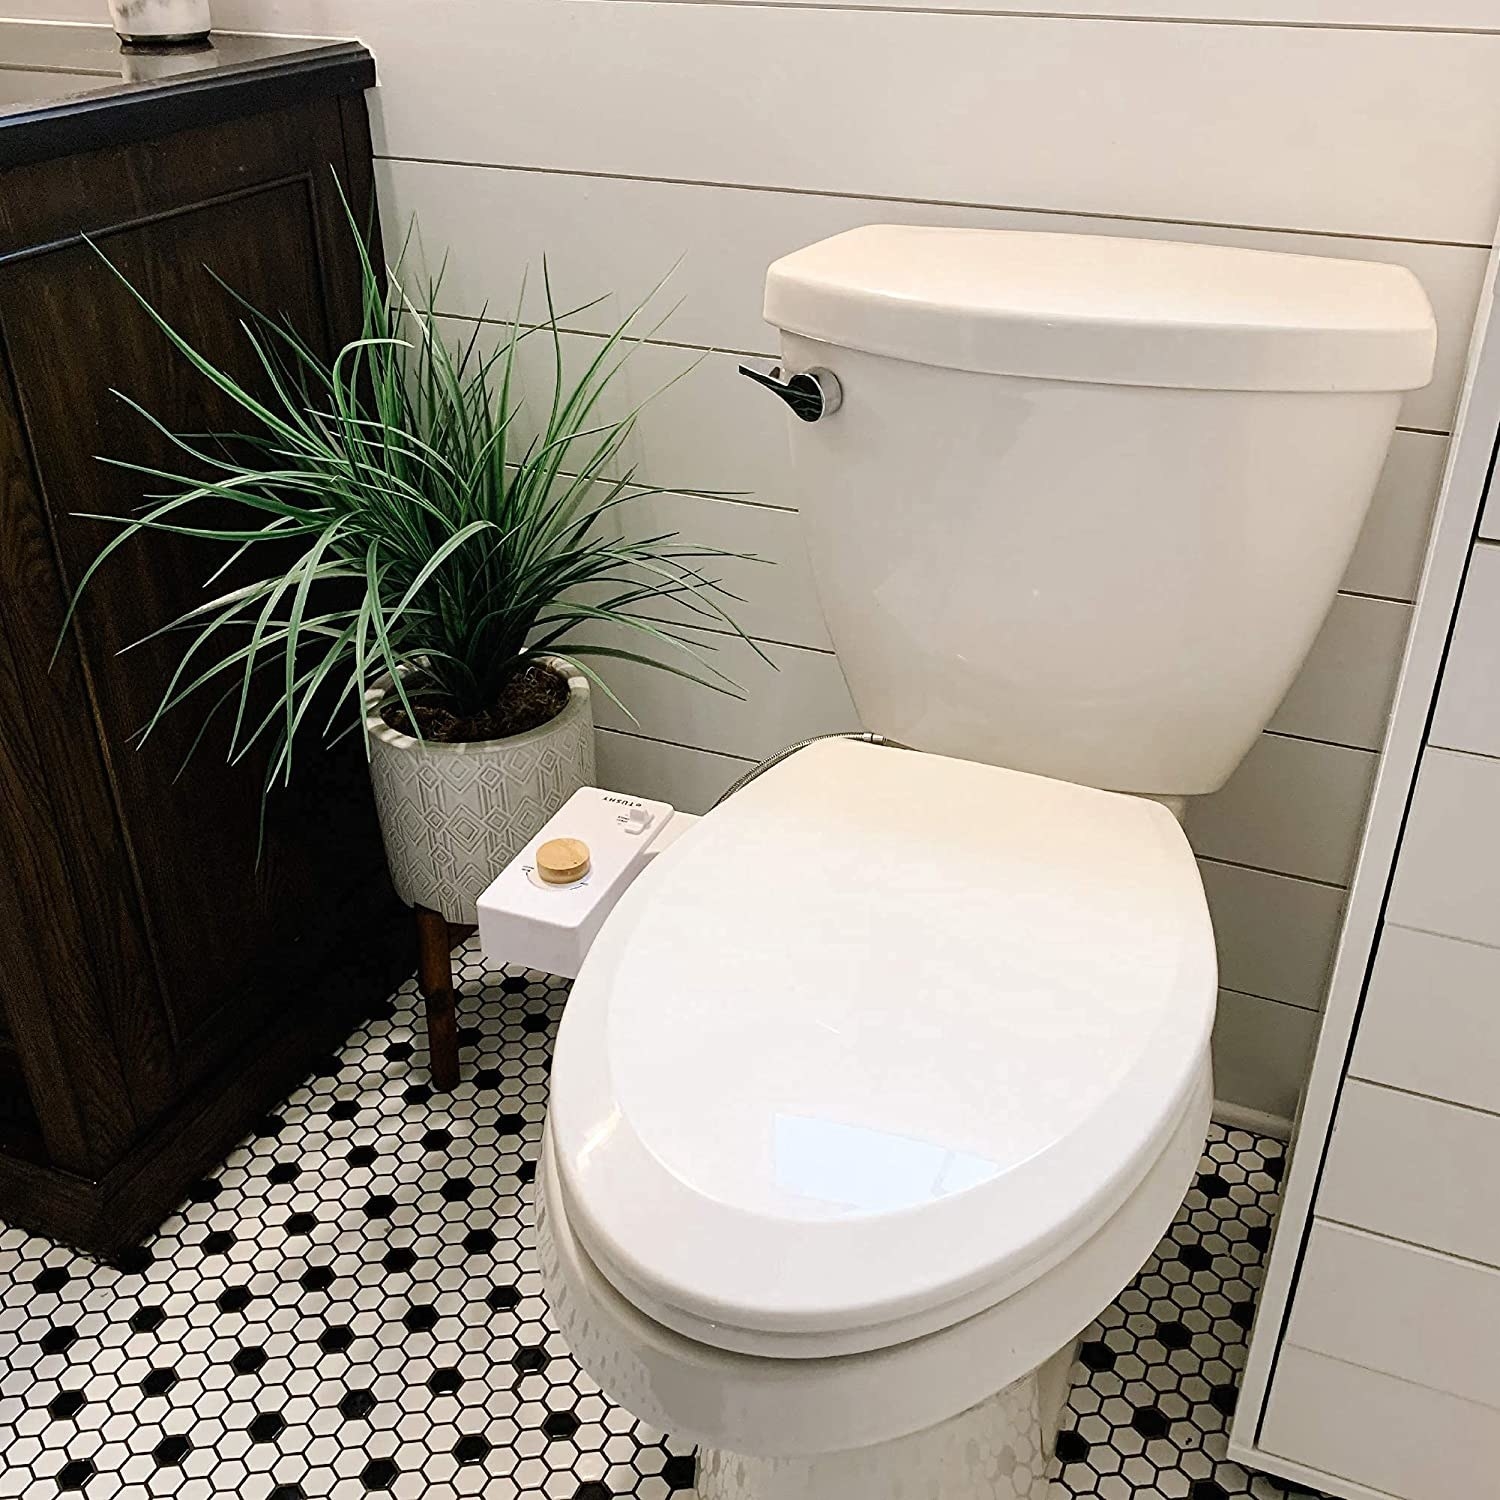 The attachment on a toilet in a modern bathroom with hexagonal tiles and a plant